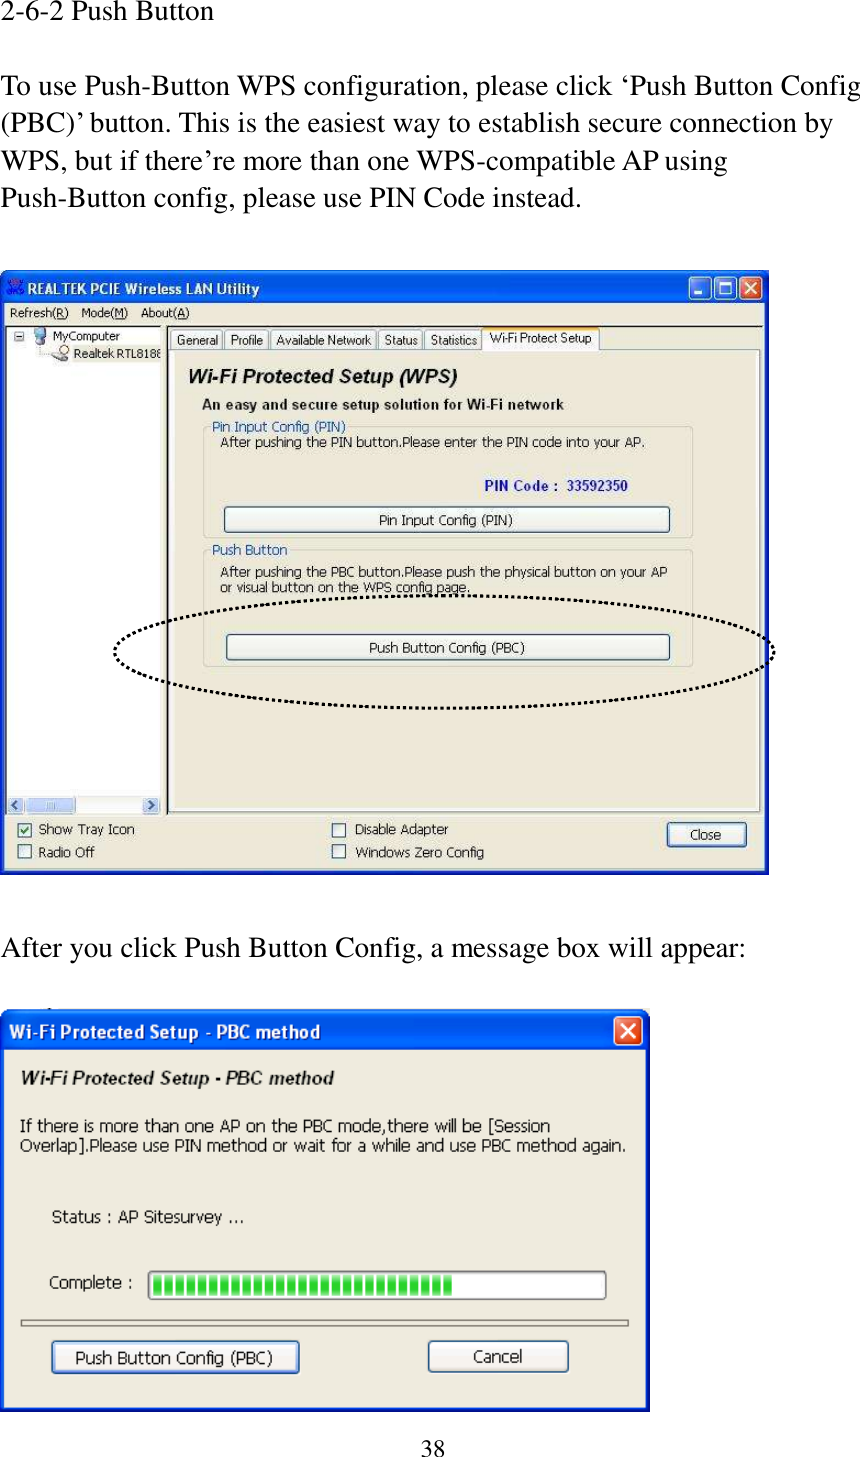 38  2-6-2 Push Button  To use Push-Button WPS configuration, please click ‘Push Button Config (PBC)’ button. This is the easiest way to establish secure connection by WPS, but if there’re more than one WPS-compatible AP using Push-Button config, please use PIN Code instead.    After you click Push Button Config, a message box will appear:   